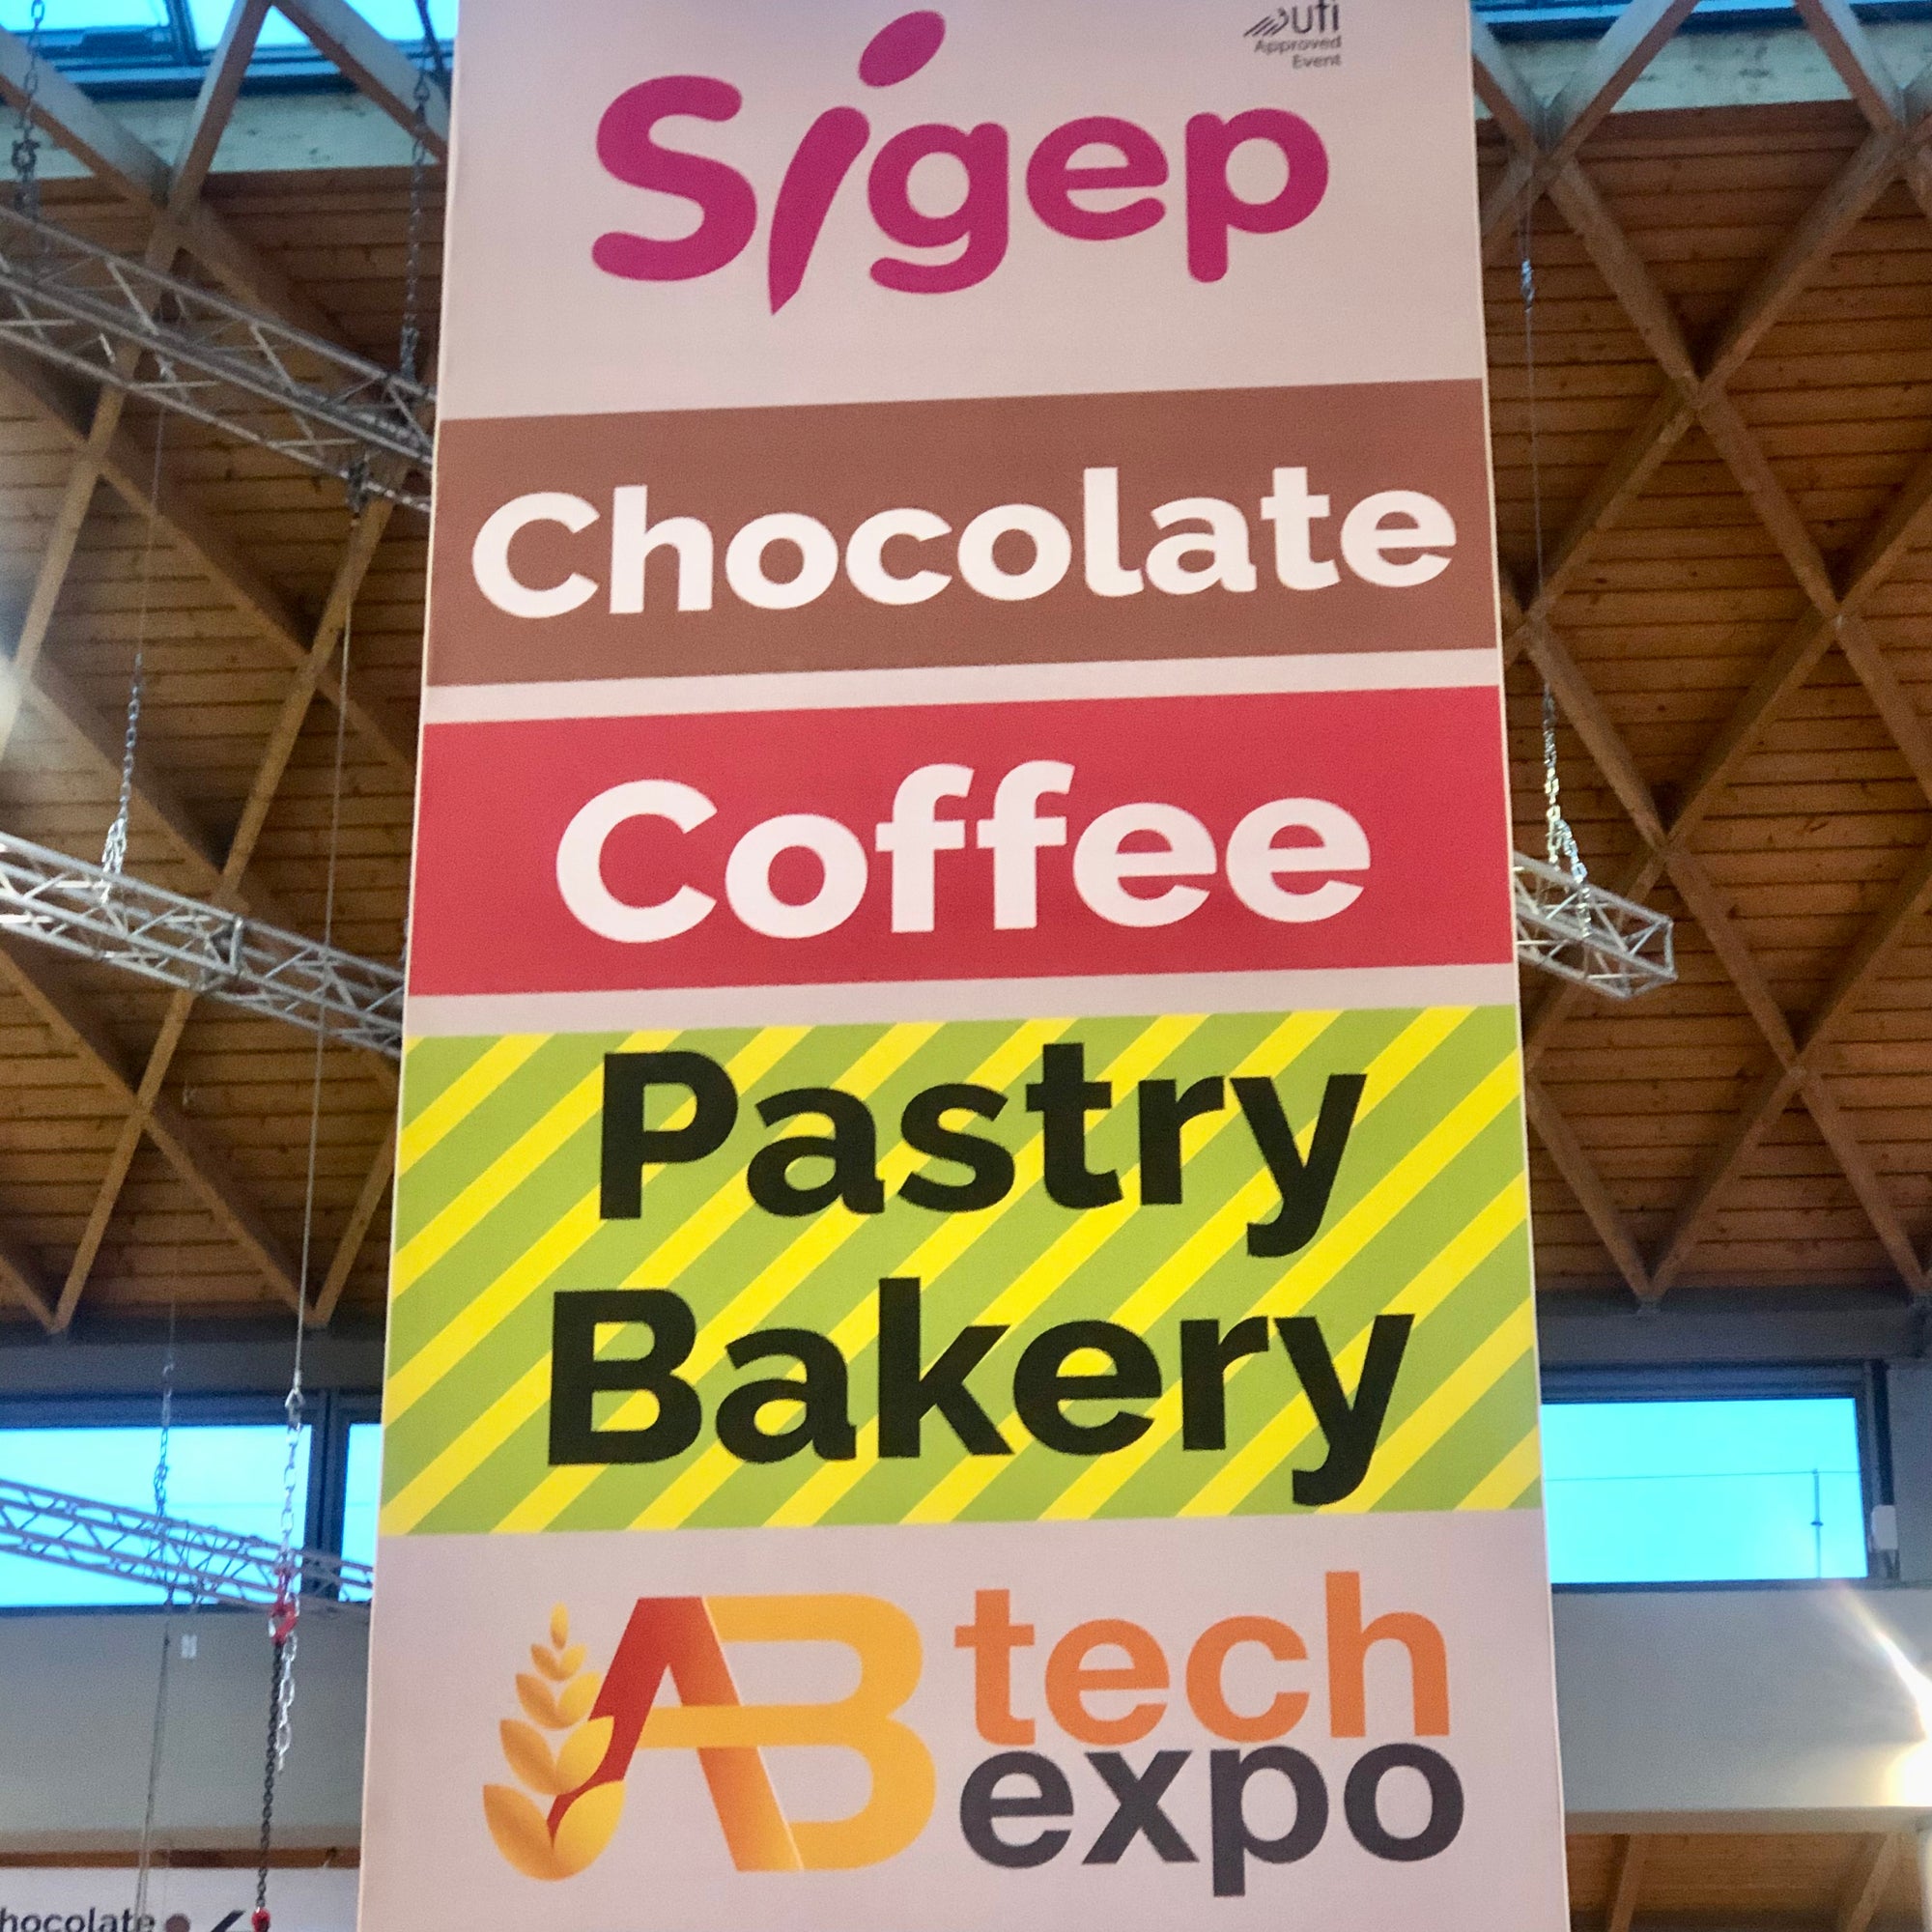 A sign that says Sigep, Chocolate, Coffee, Pastry and Bakery